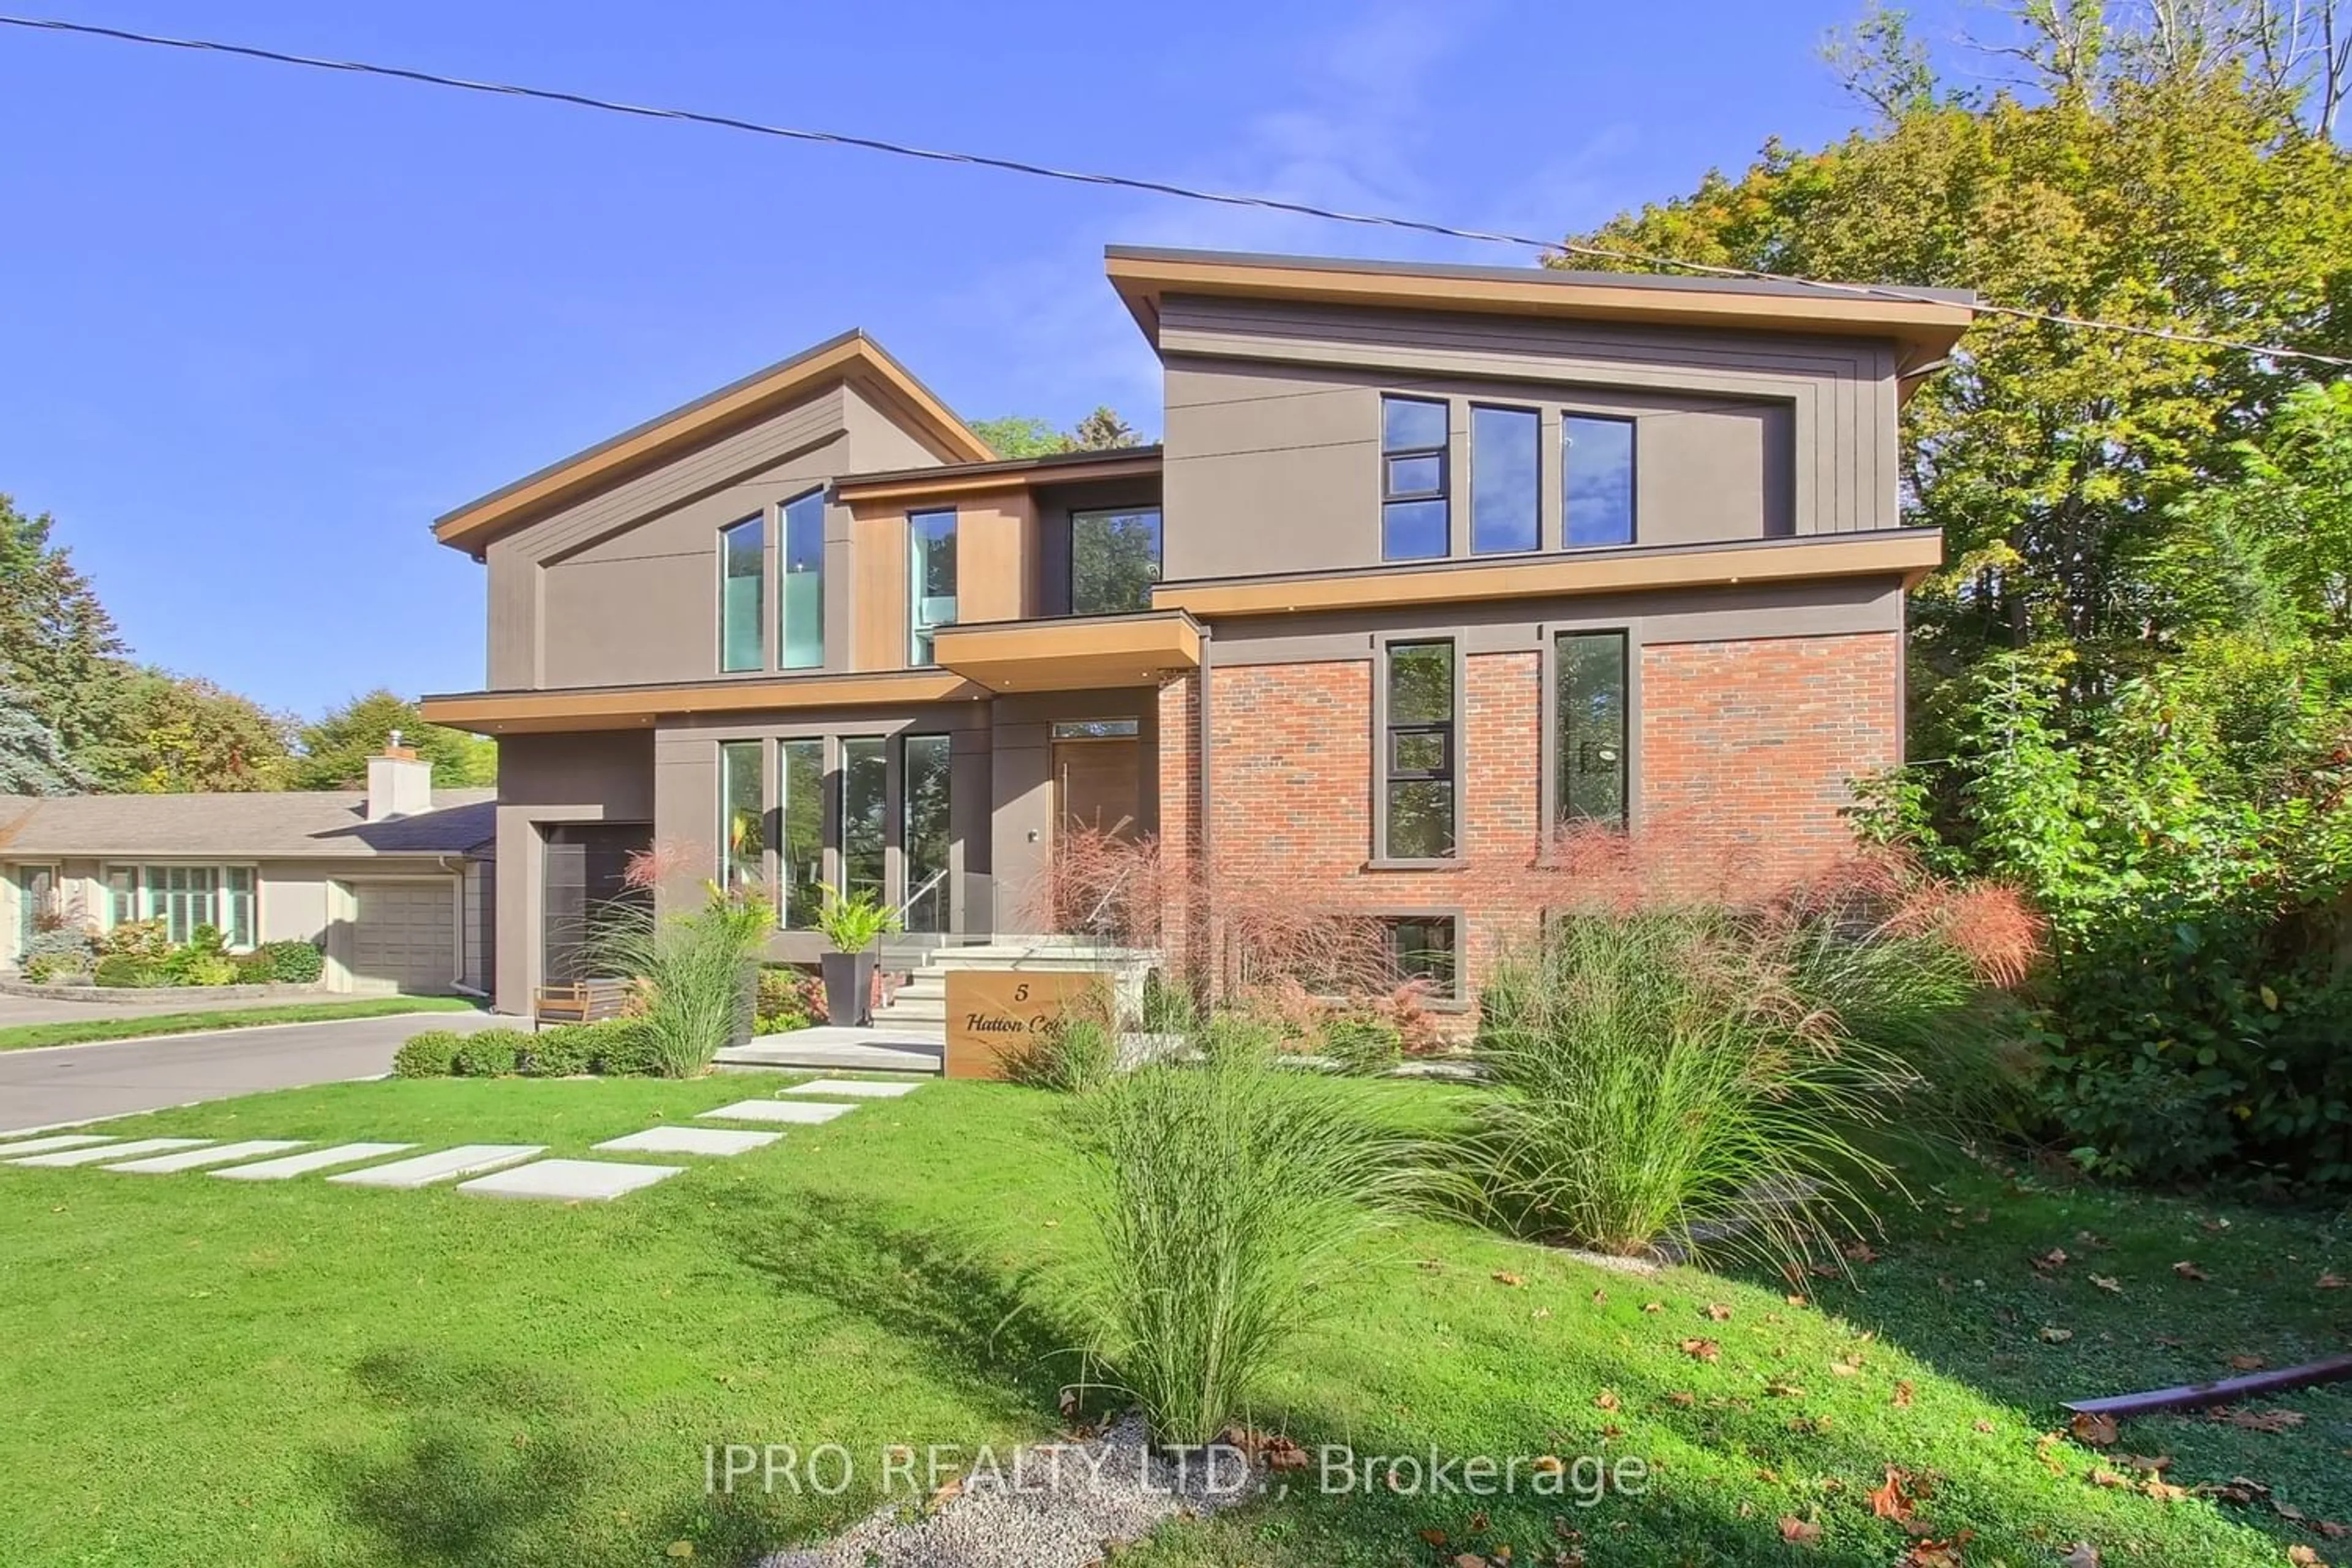 Home with brick exterior material for 5 Hatton Crt, Toronto Ontario M9A 1J6